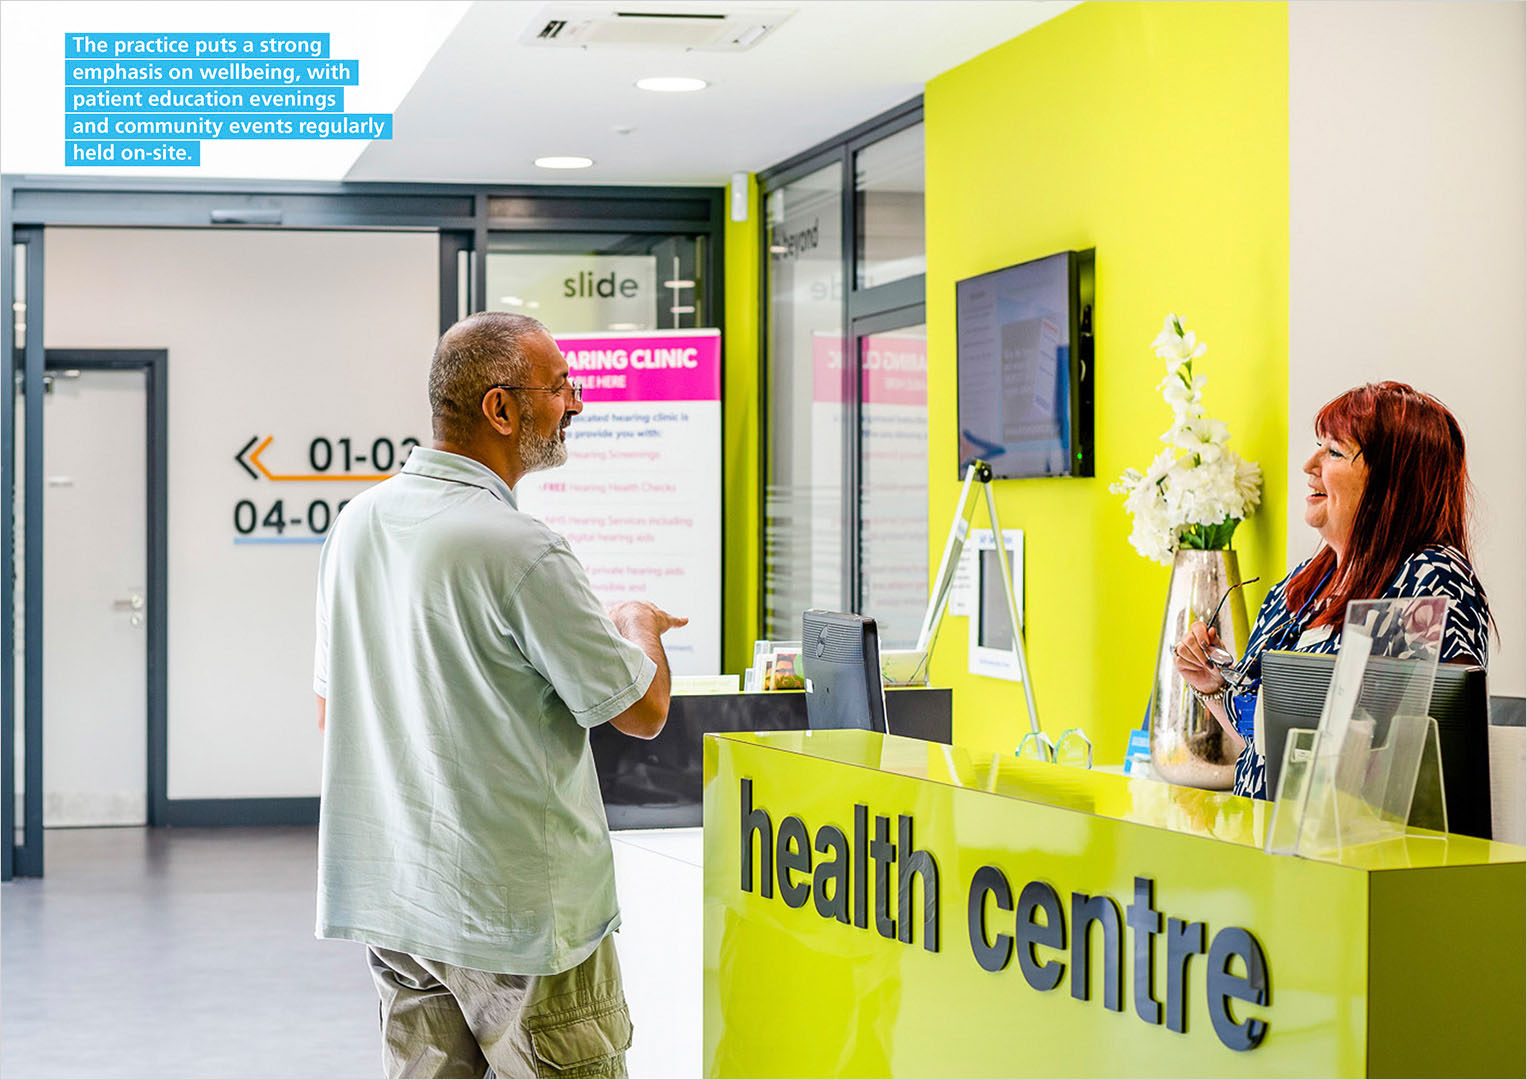 Spread from NHS Brochure featuring Health Centre receptionist in conversation with patient